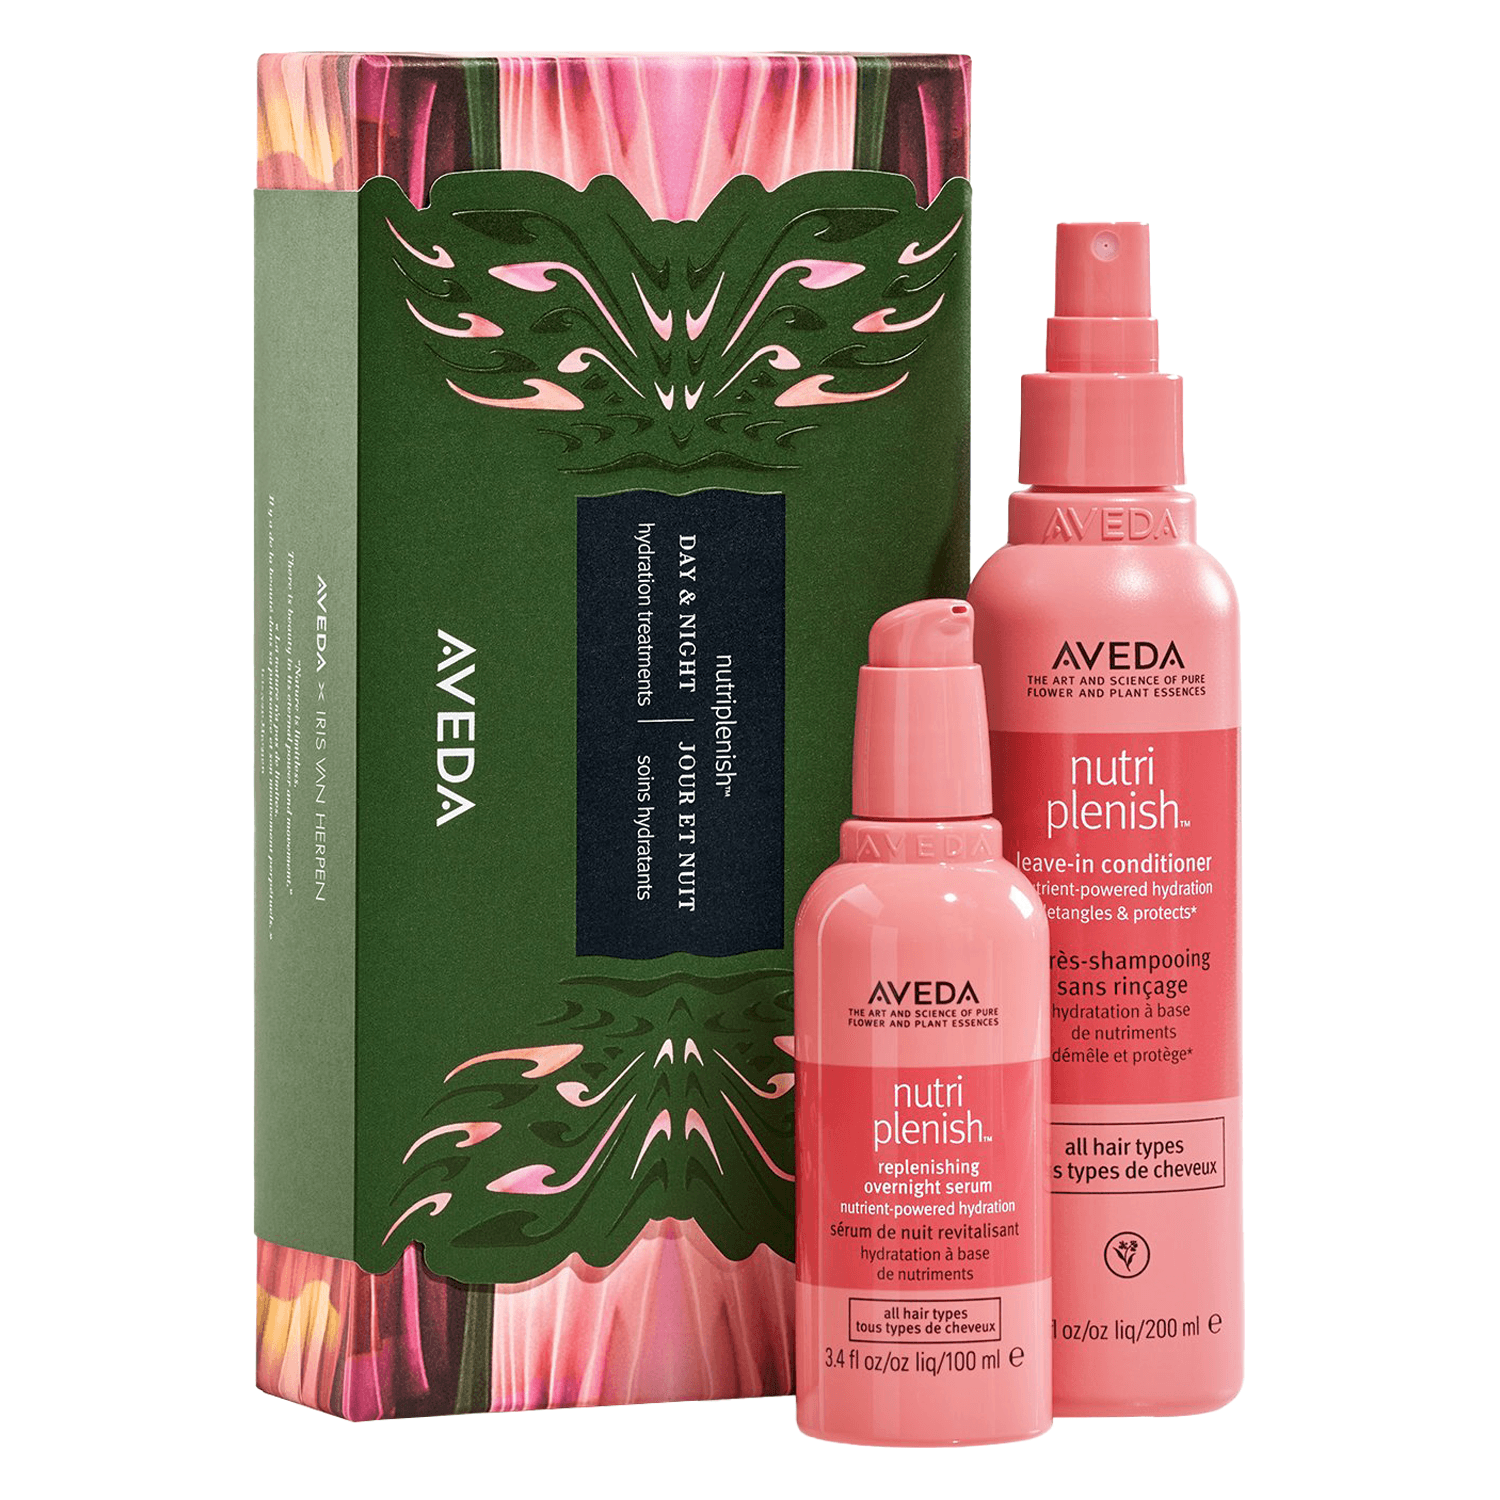 aveda specials - day and night hydration treatments